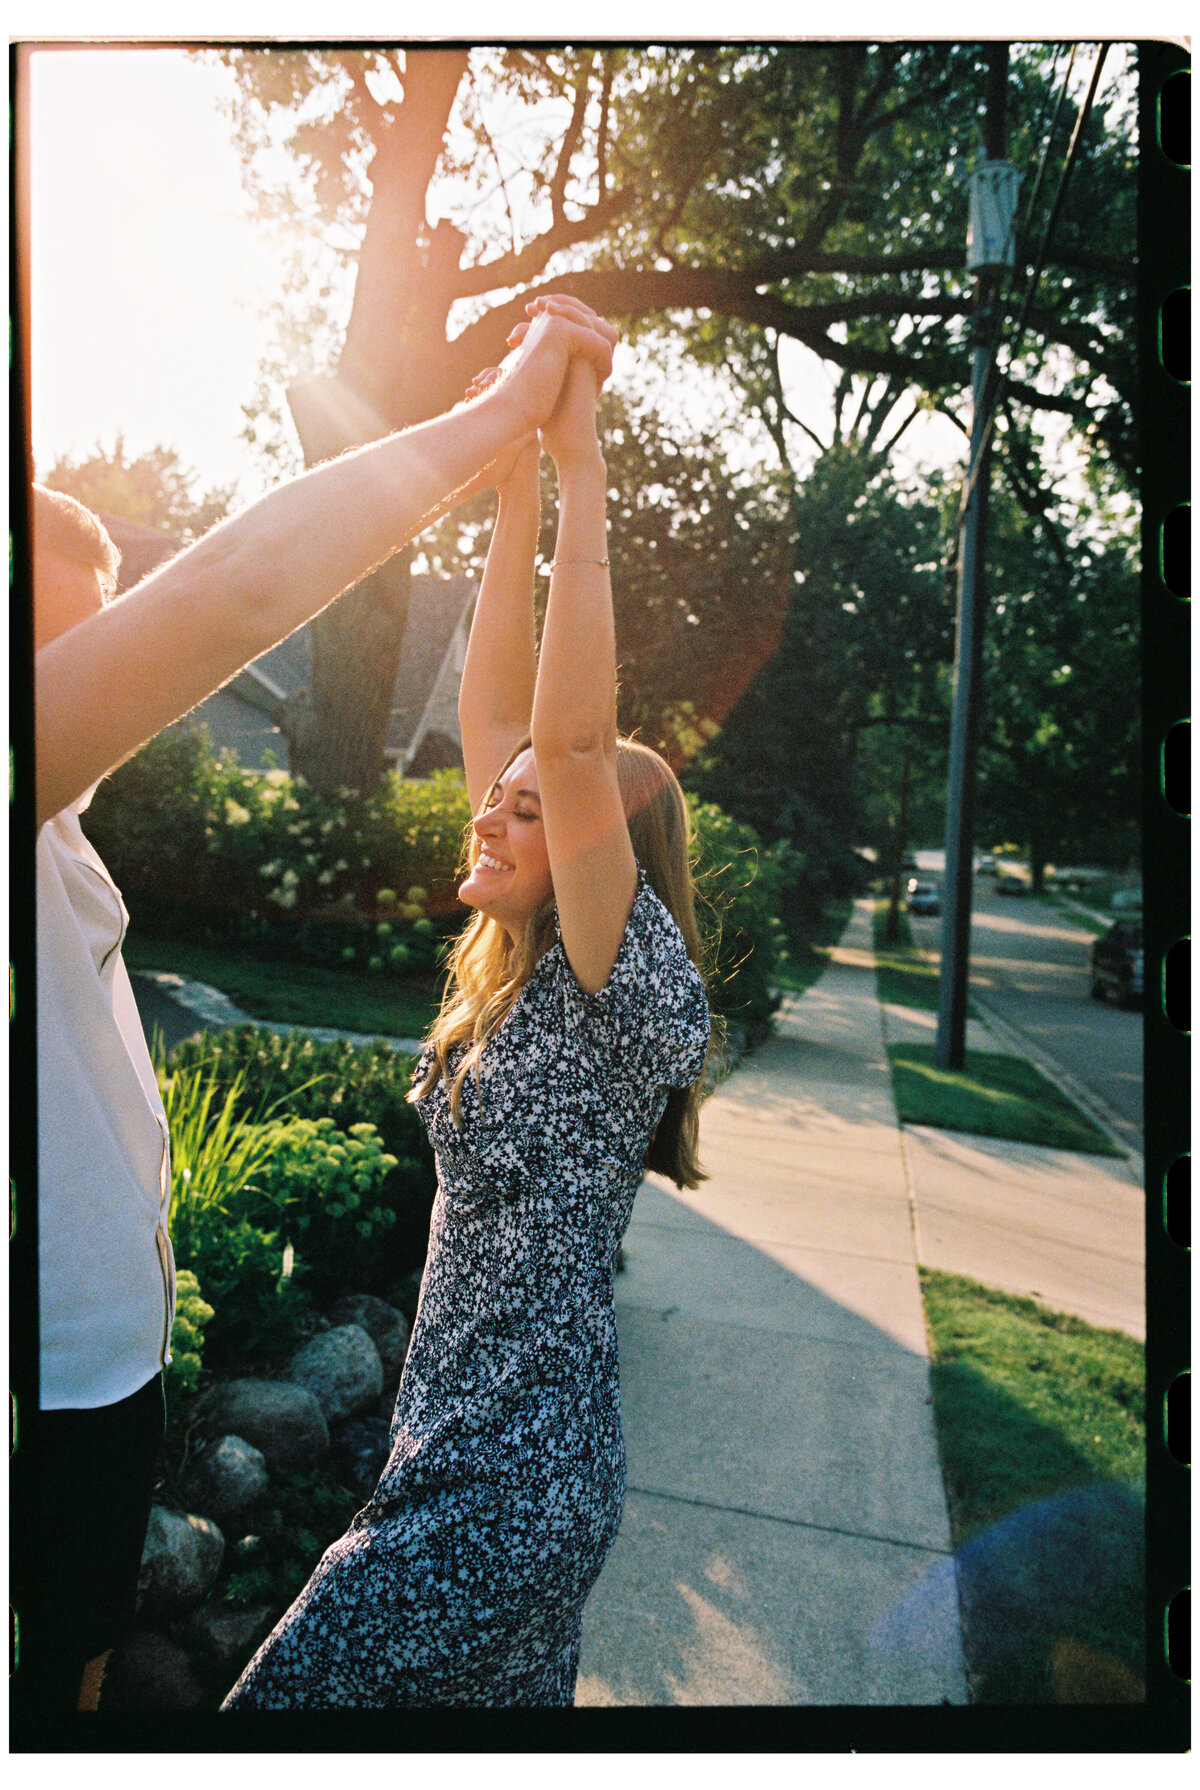 Excelsior-Minnesota-Summer-Engagement-Session-Clever-Disarray-38